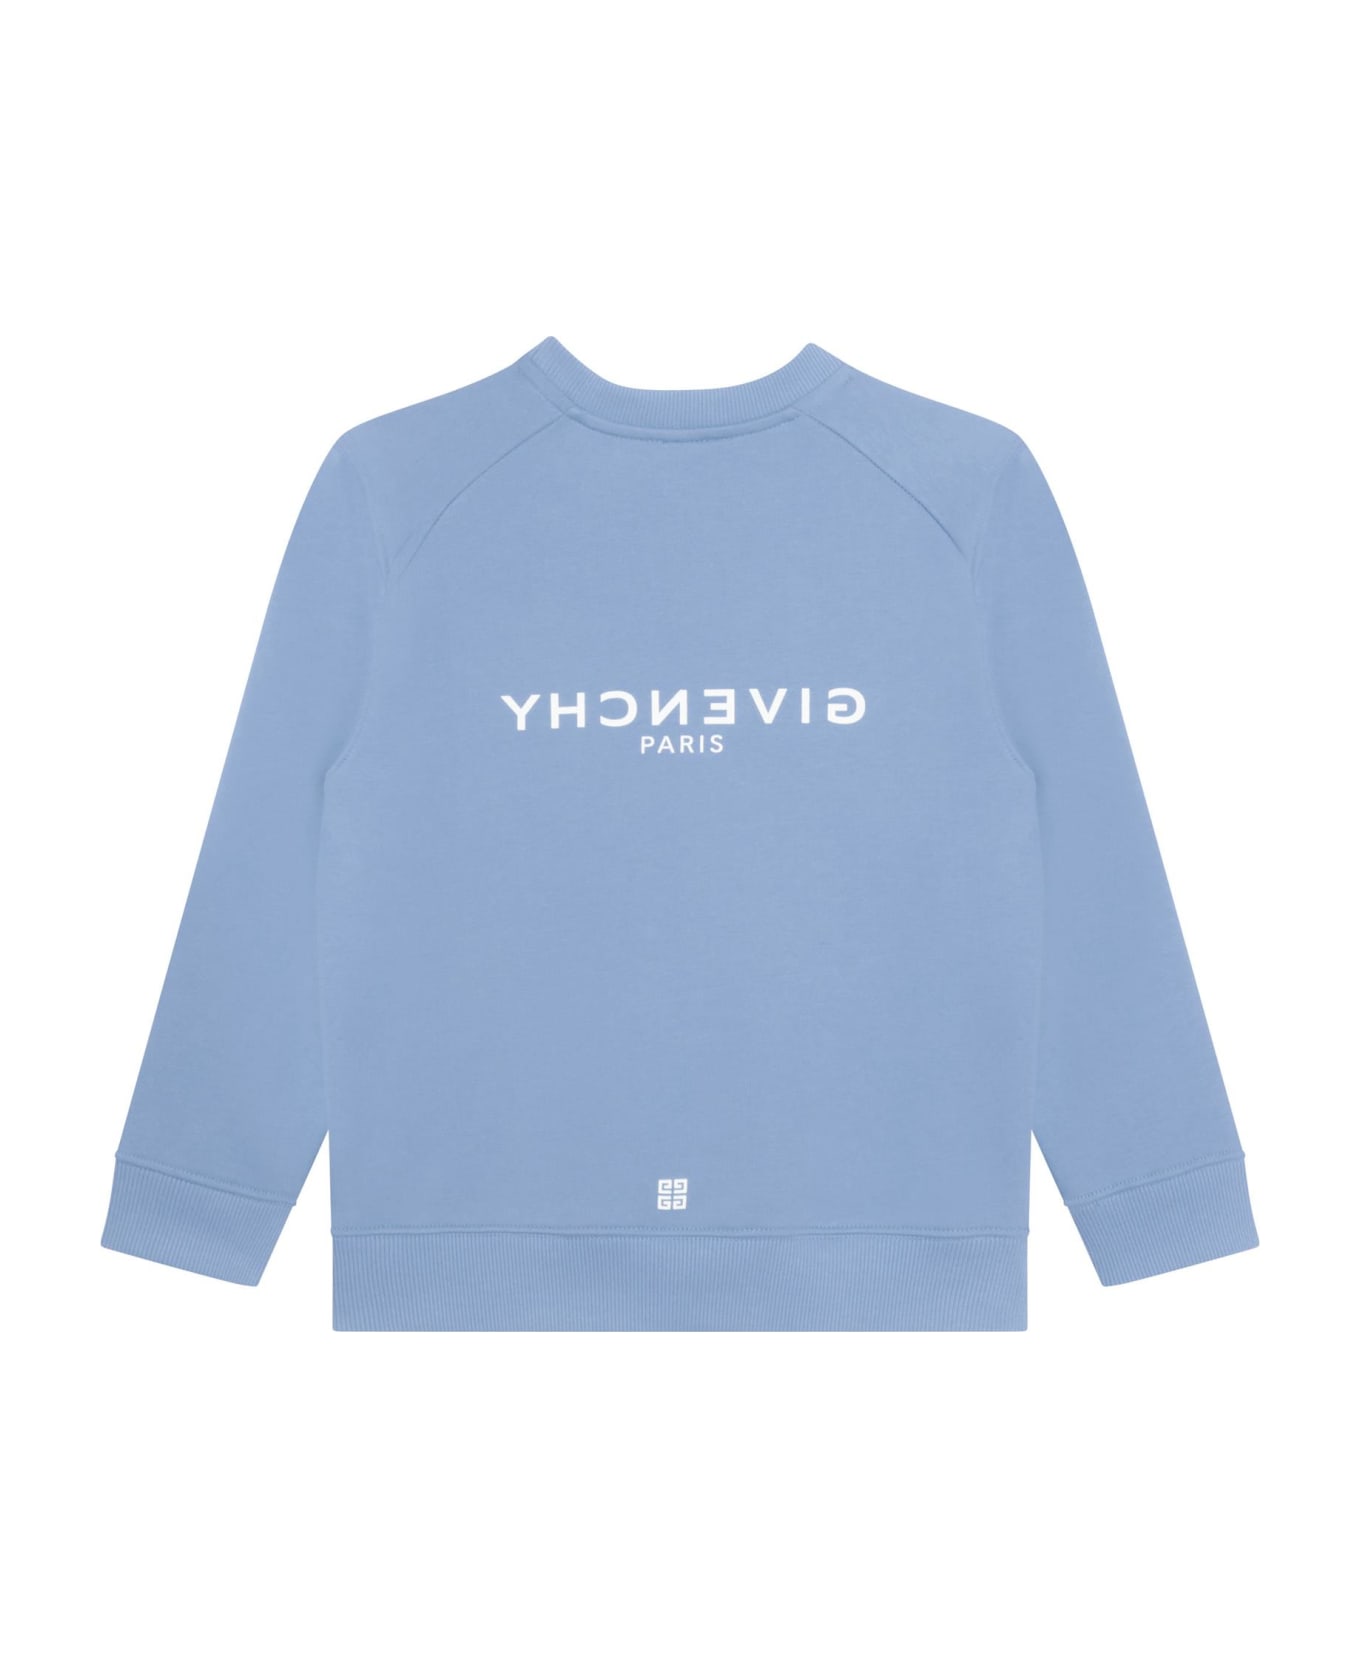 Givenchy Sweatshirt With Print - Light blue